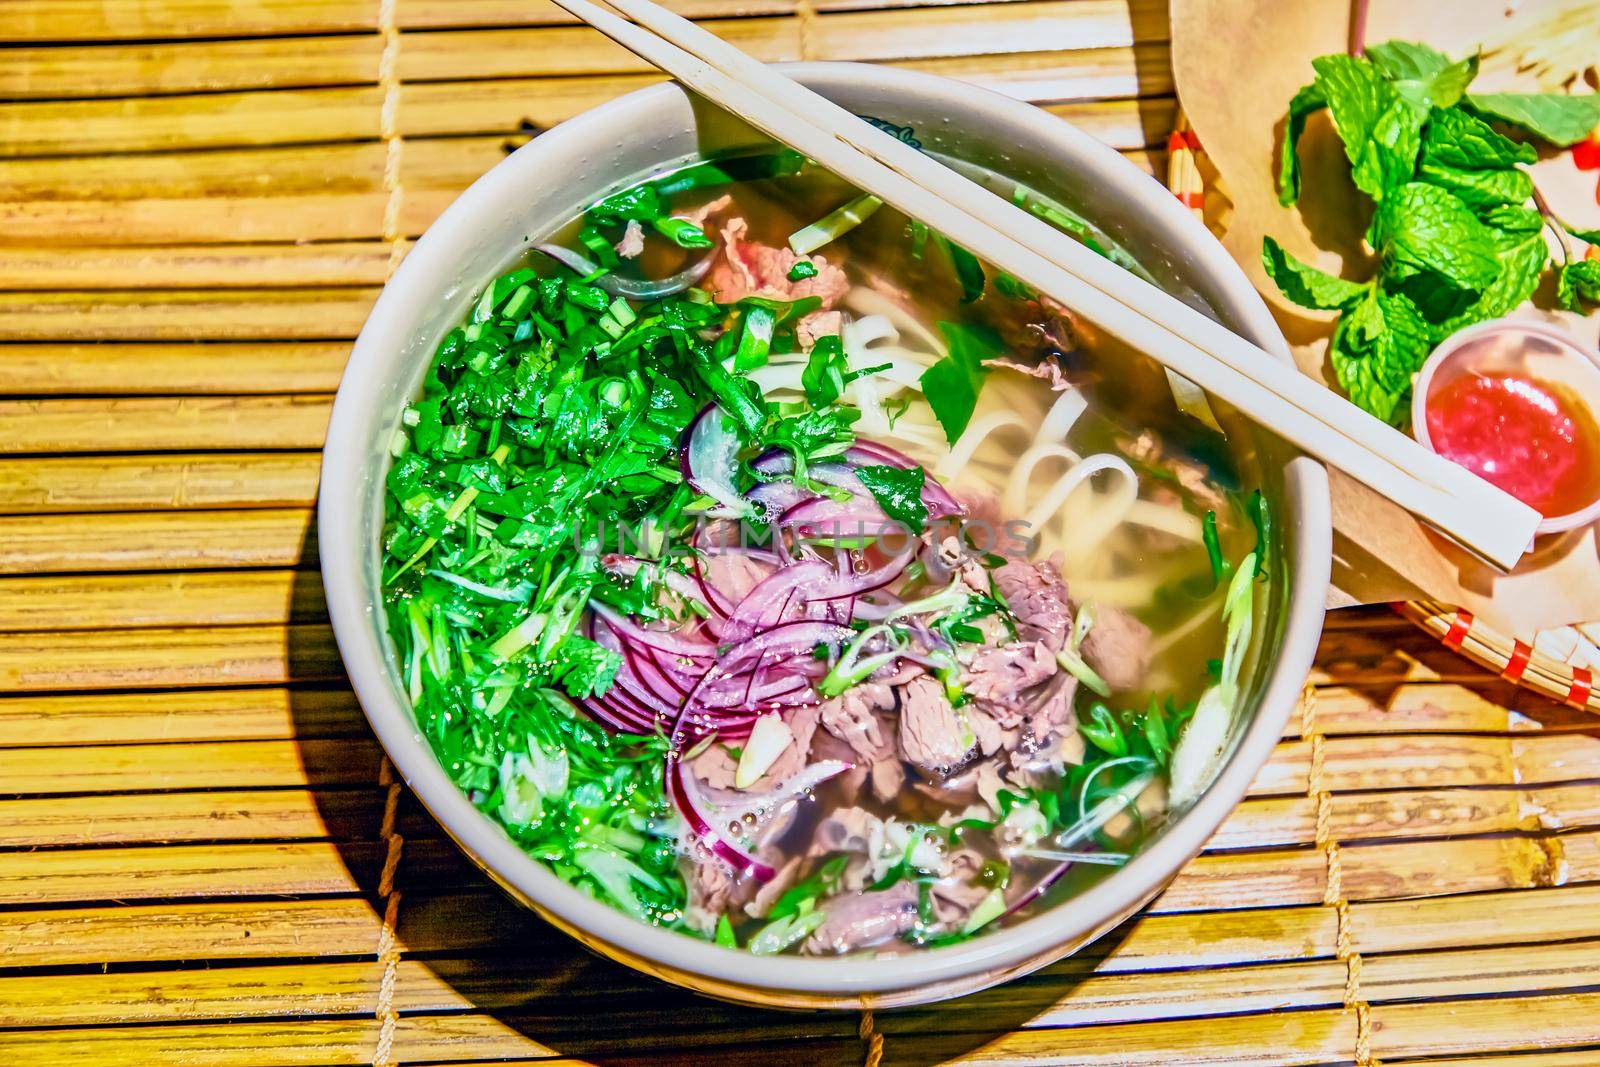 Traditional Vietnamese soup, Pho Bo in a large bowl.